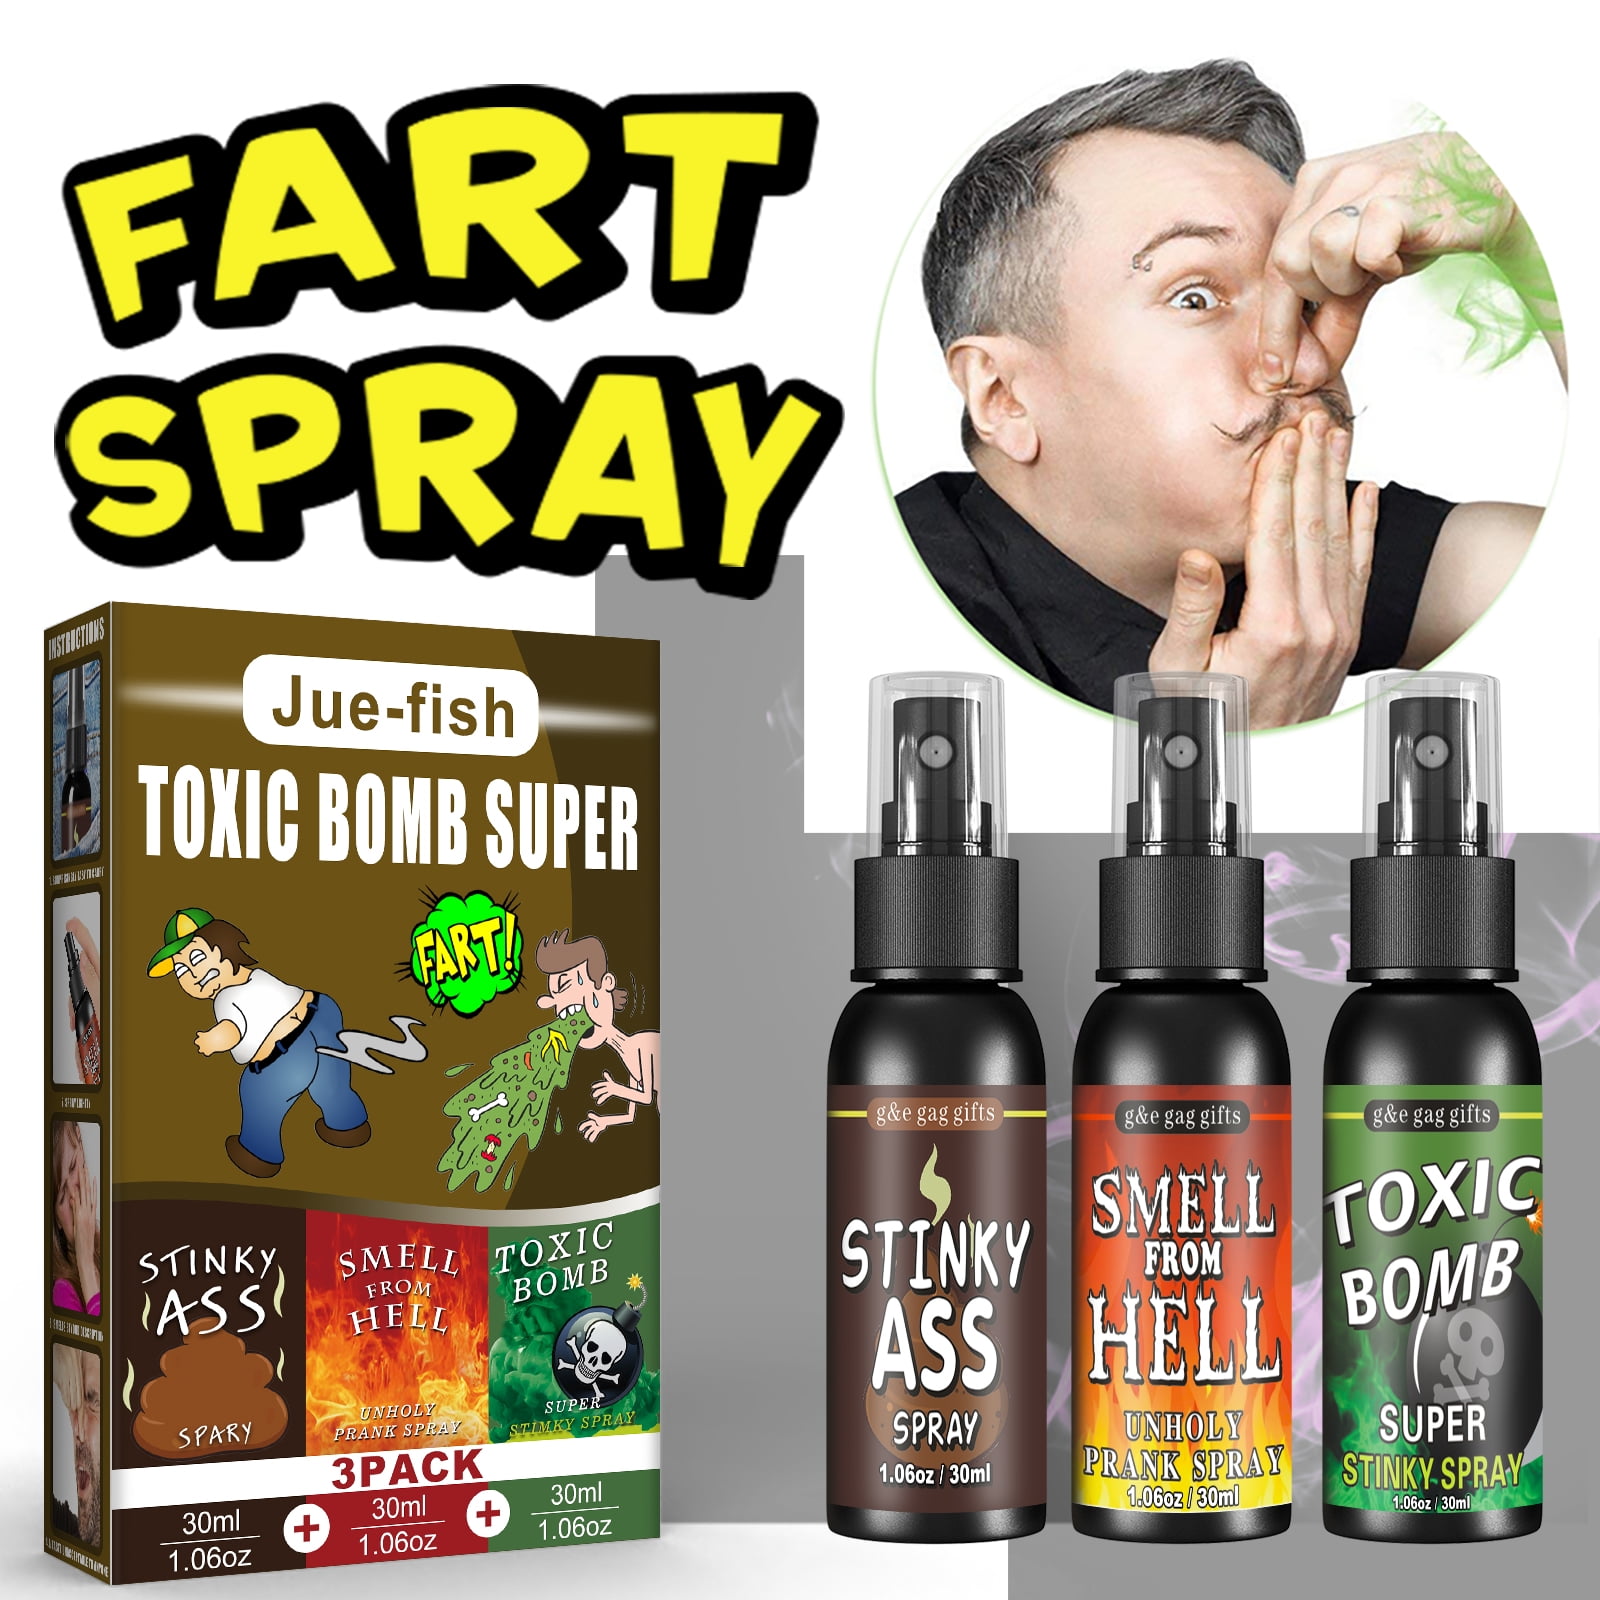  A AIFAMY 3P Fart Spray Extra Strong 30ml Potent Stink Spray Non  Toxic Fart Bomb Prank Stuff Hilarious Gag Gifts for Adults or Kids : Toys &  Games